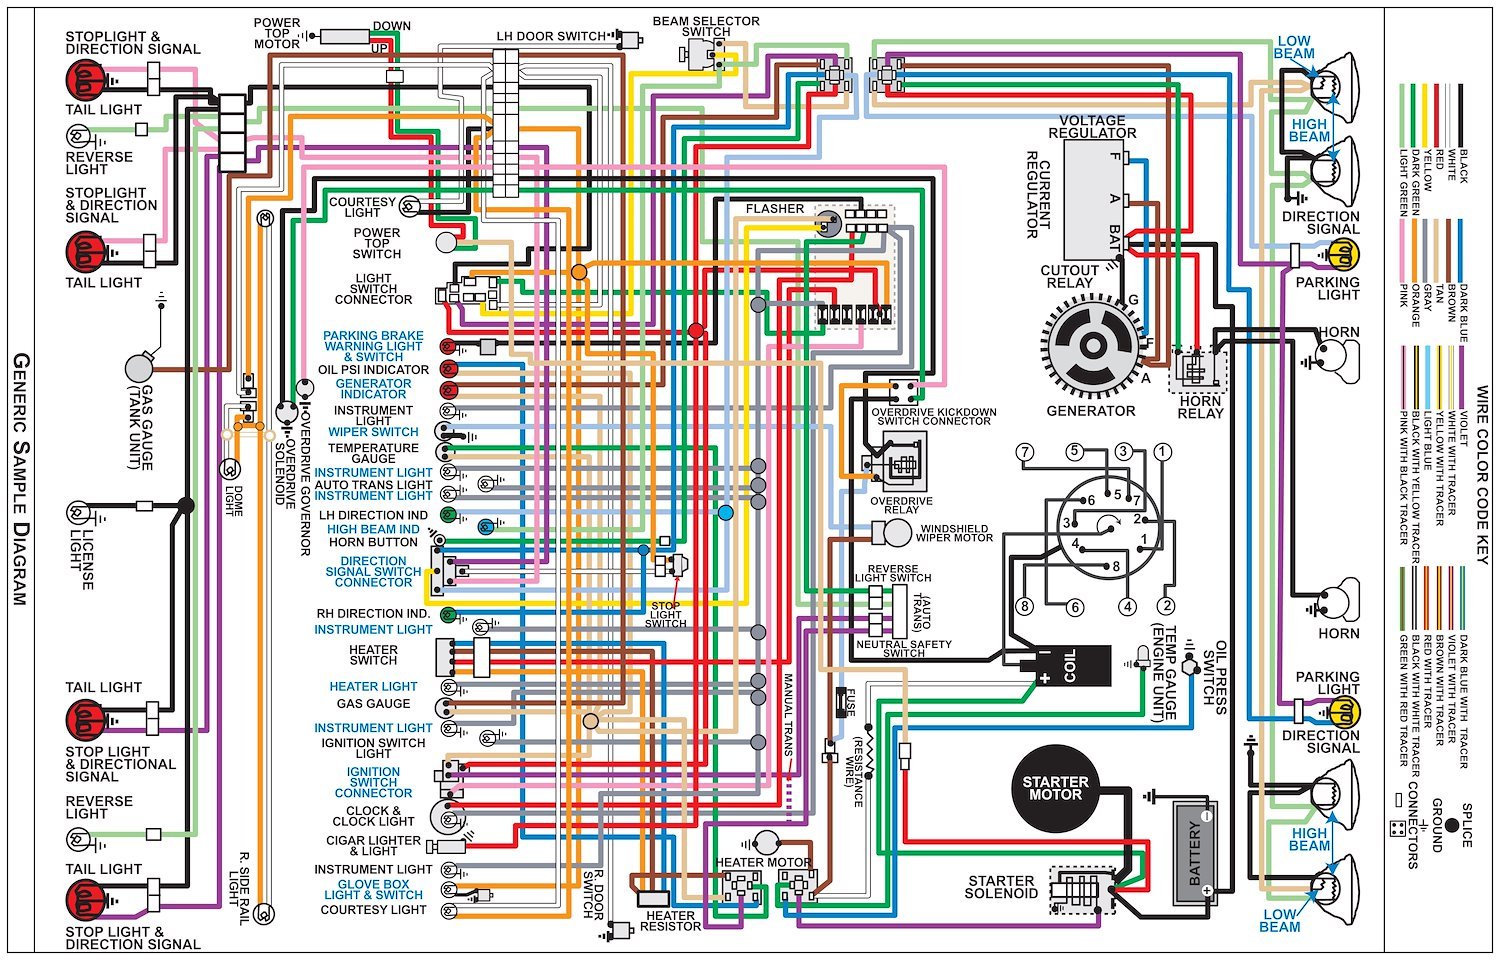 Wiring Diagram for 1966 Dodge Coronet, 11 in x 17 in., Laminated